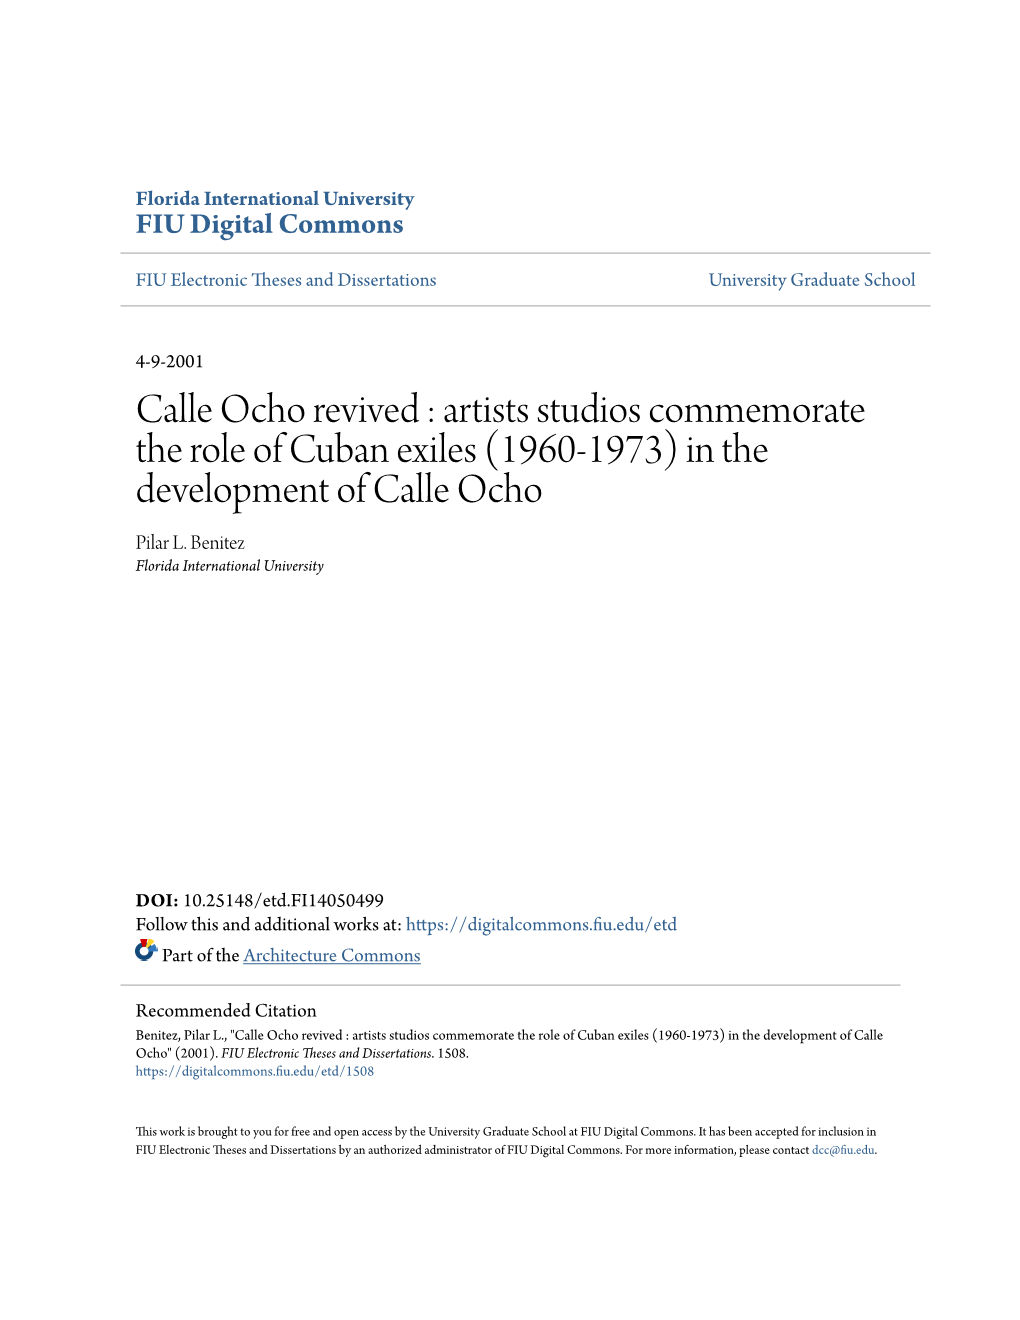 Calle Ocho Revived : Artists Studios Commemorate the Role of Cuban Exiles (1960-1973) in the Development of Calle Ocho Pilar L